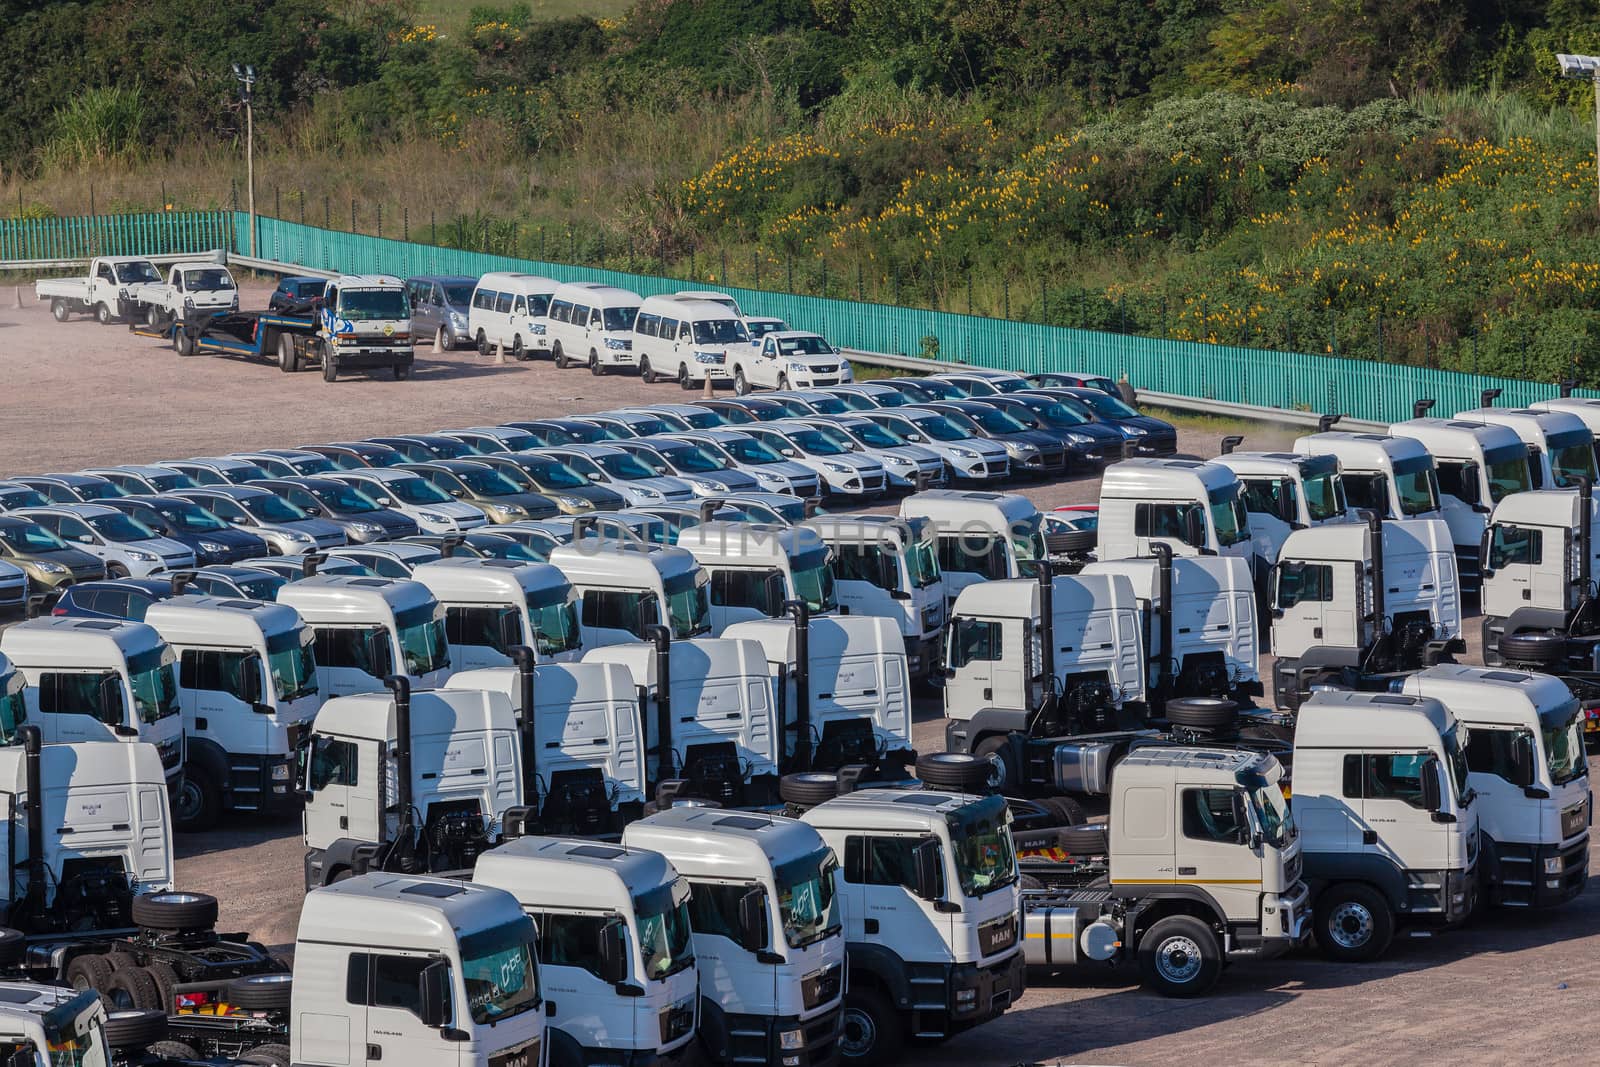 New manufactured trucks lined up in vehicle yard for distribution to customers.